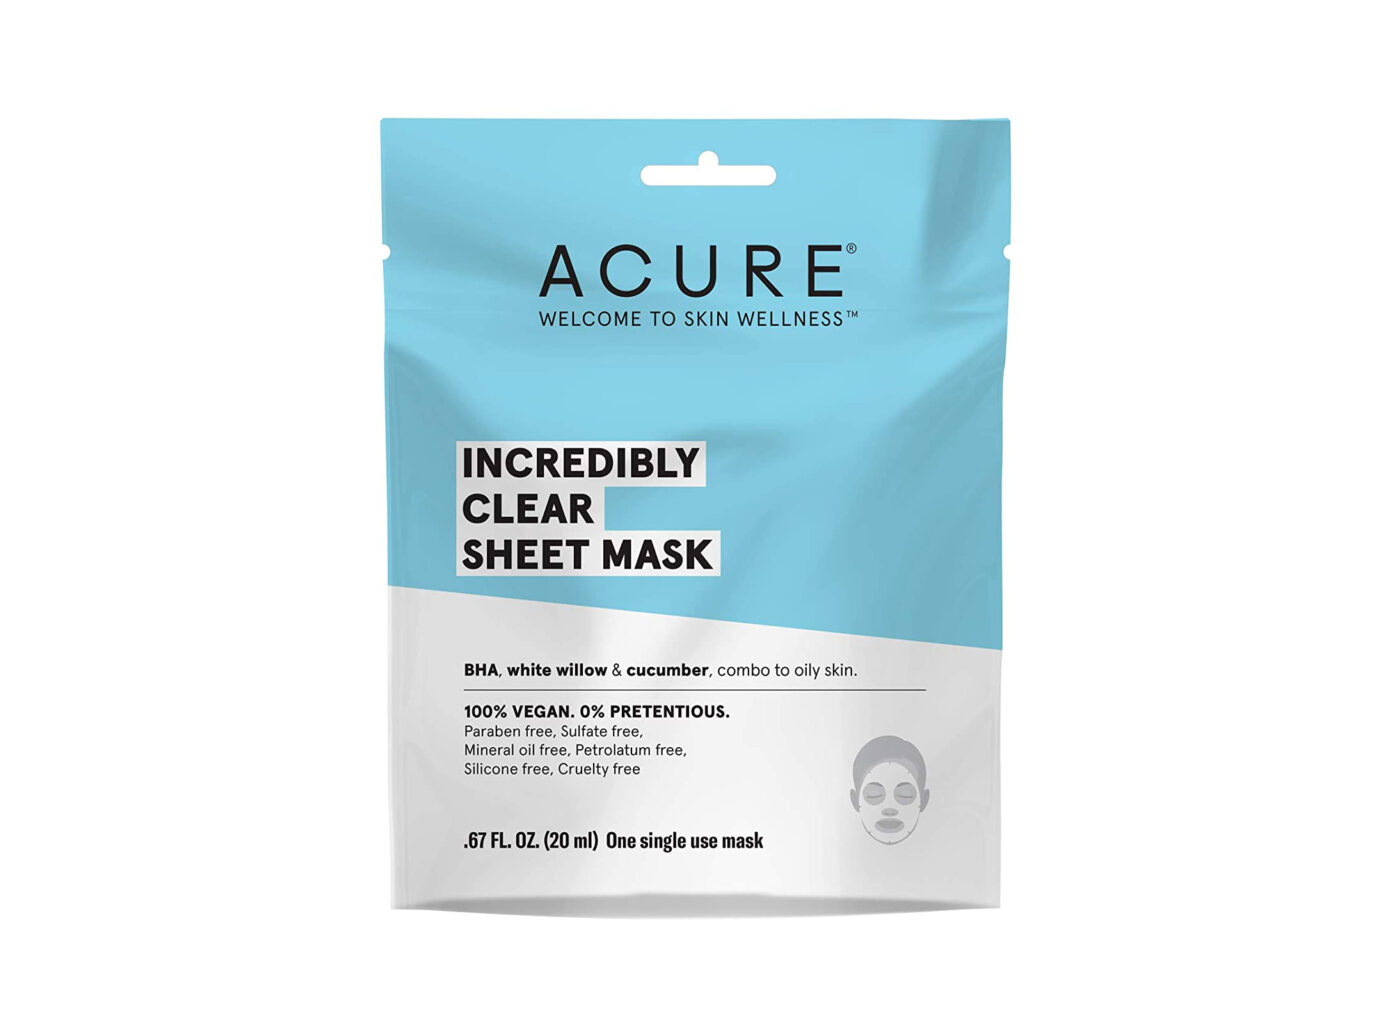 ACURE Incredibly Clear Sheet Mask